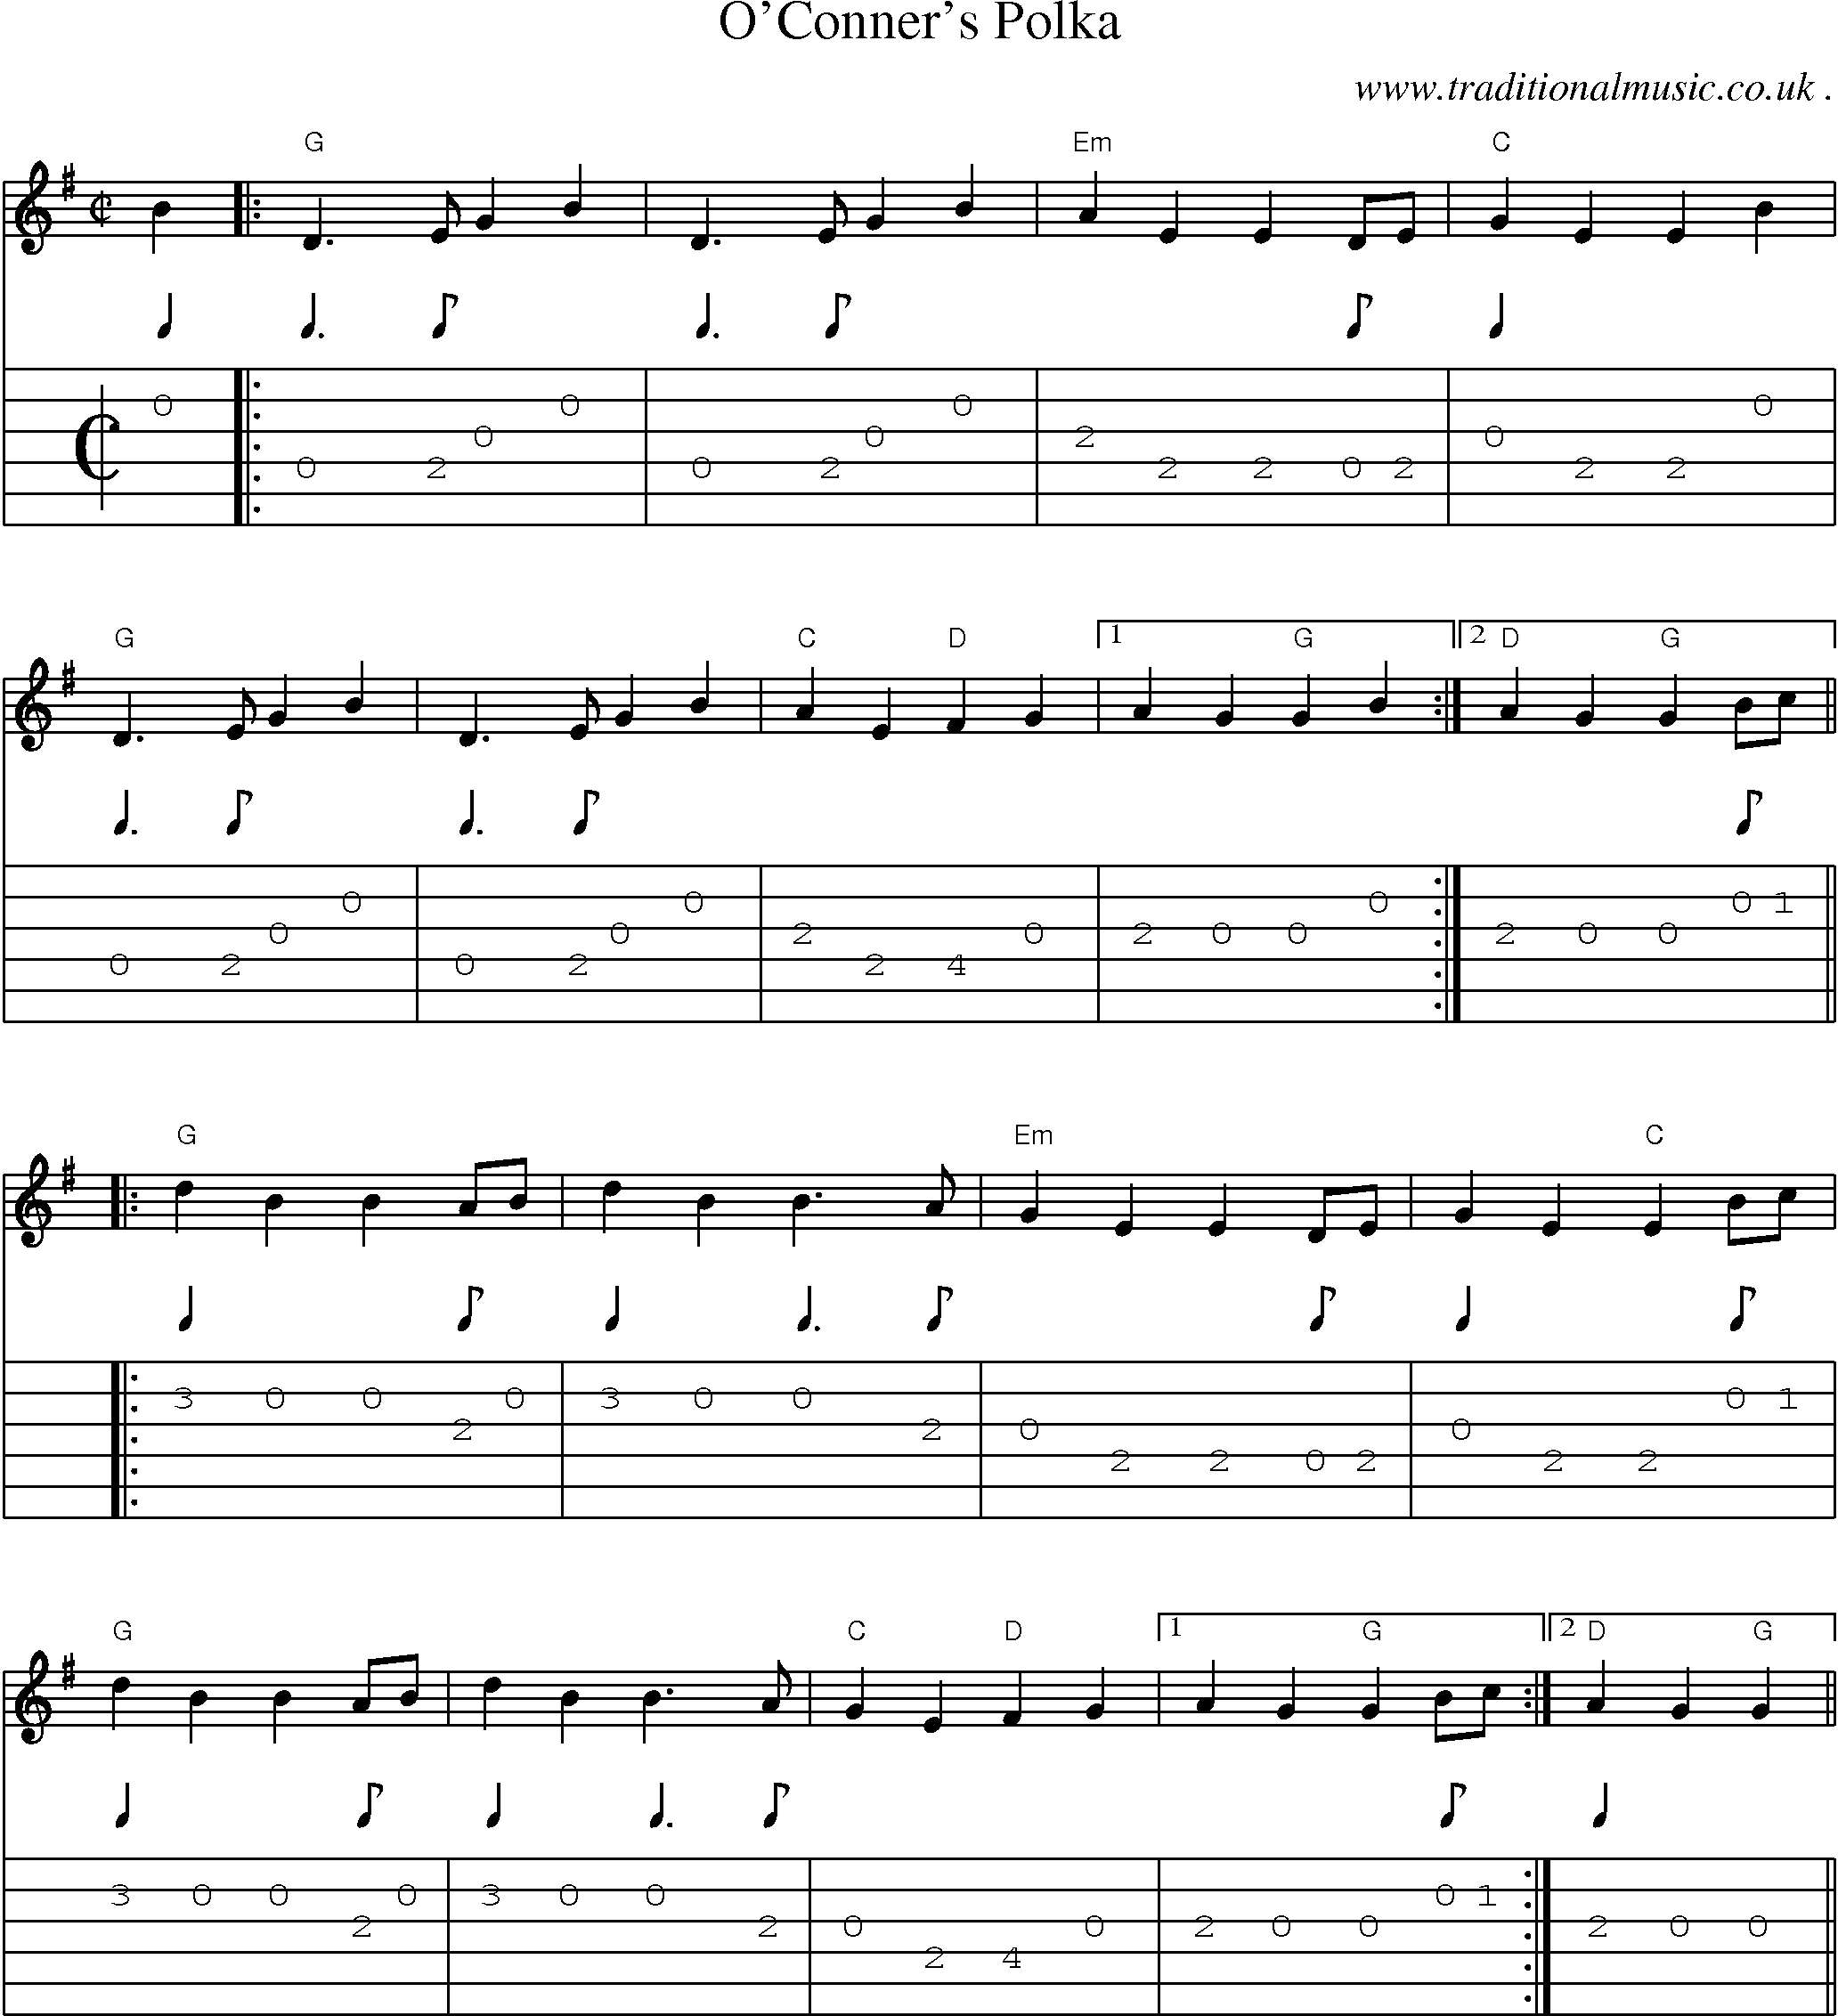 Sheet-music  score, Chords and Guitar Tabs for Oconners Polka